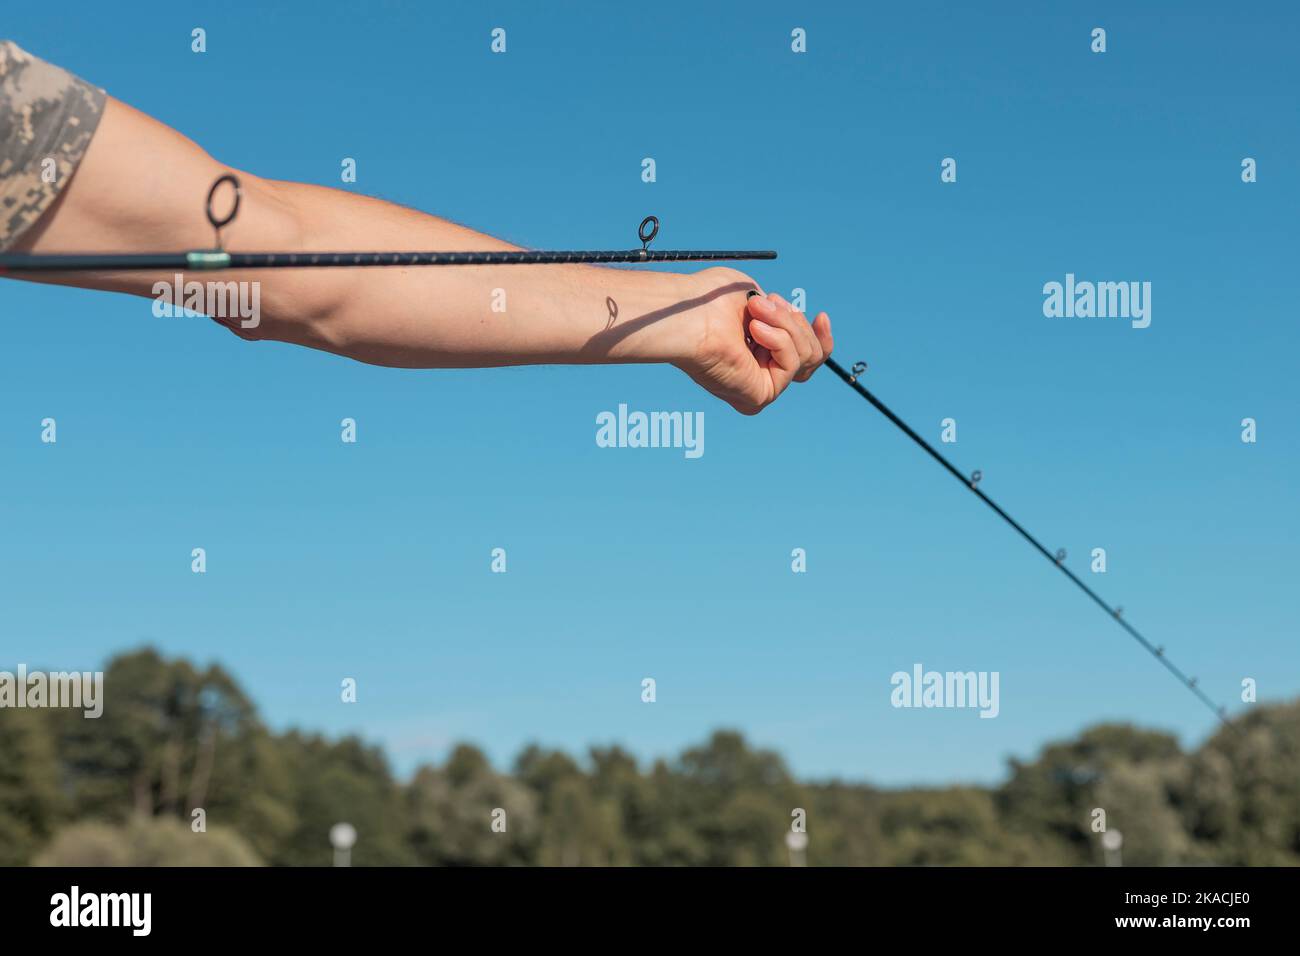 https://c8.alamy.com/comp/2KACJE0/male-hands-holding-broken-fishing-rod-and-assembling-it-over-blue-clear-sky-in-summer-2KACJE0.jpg